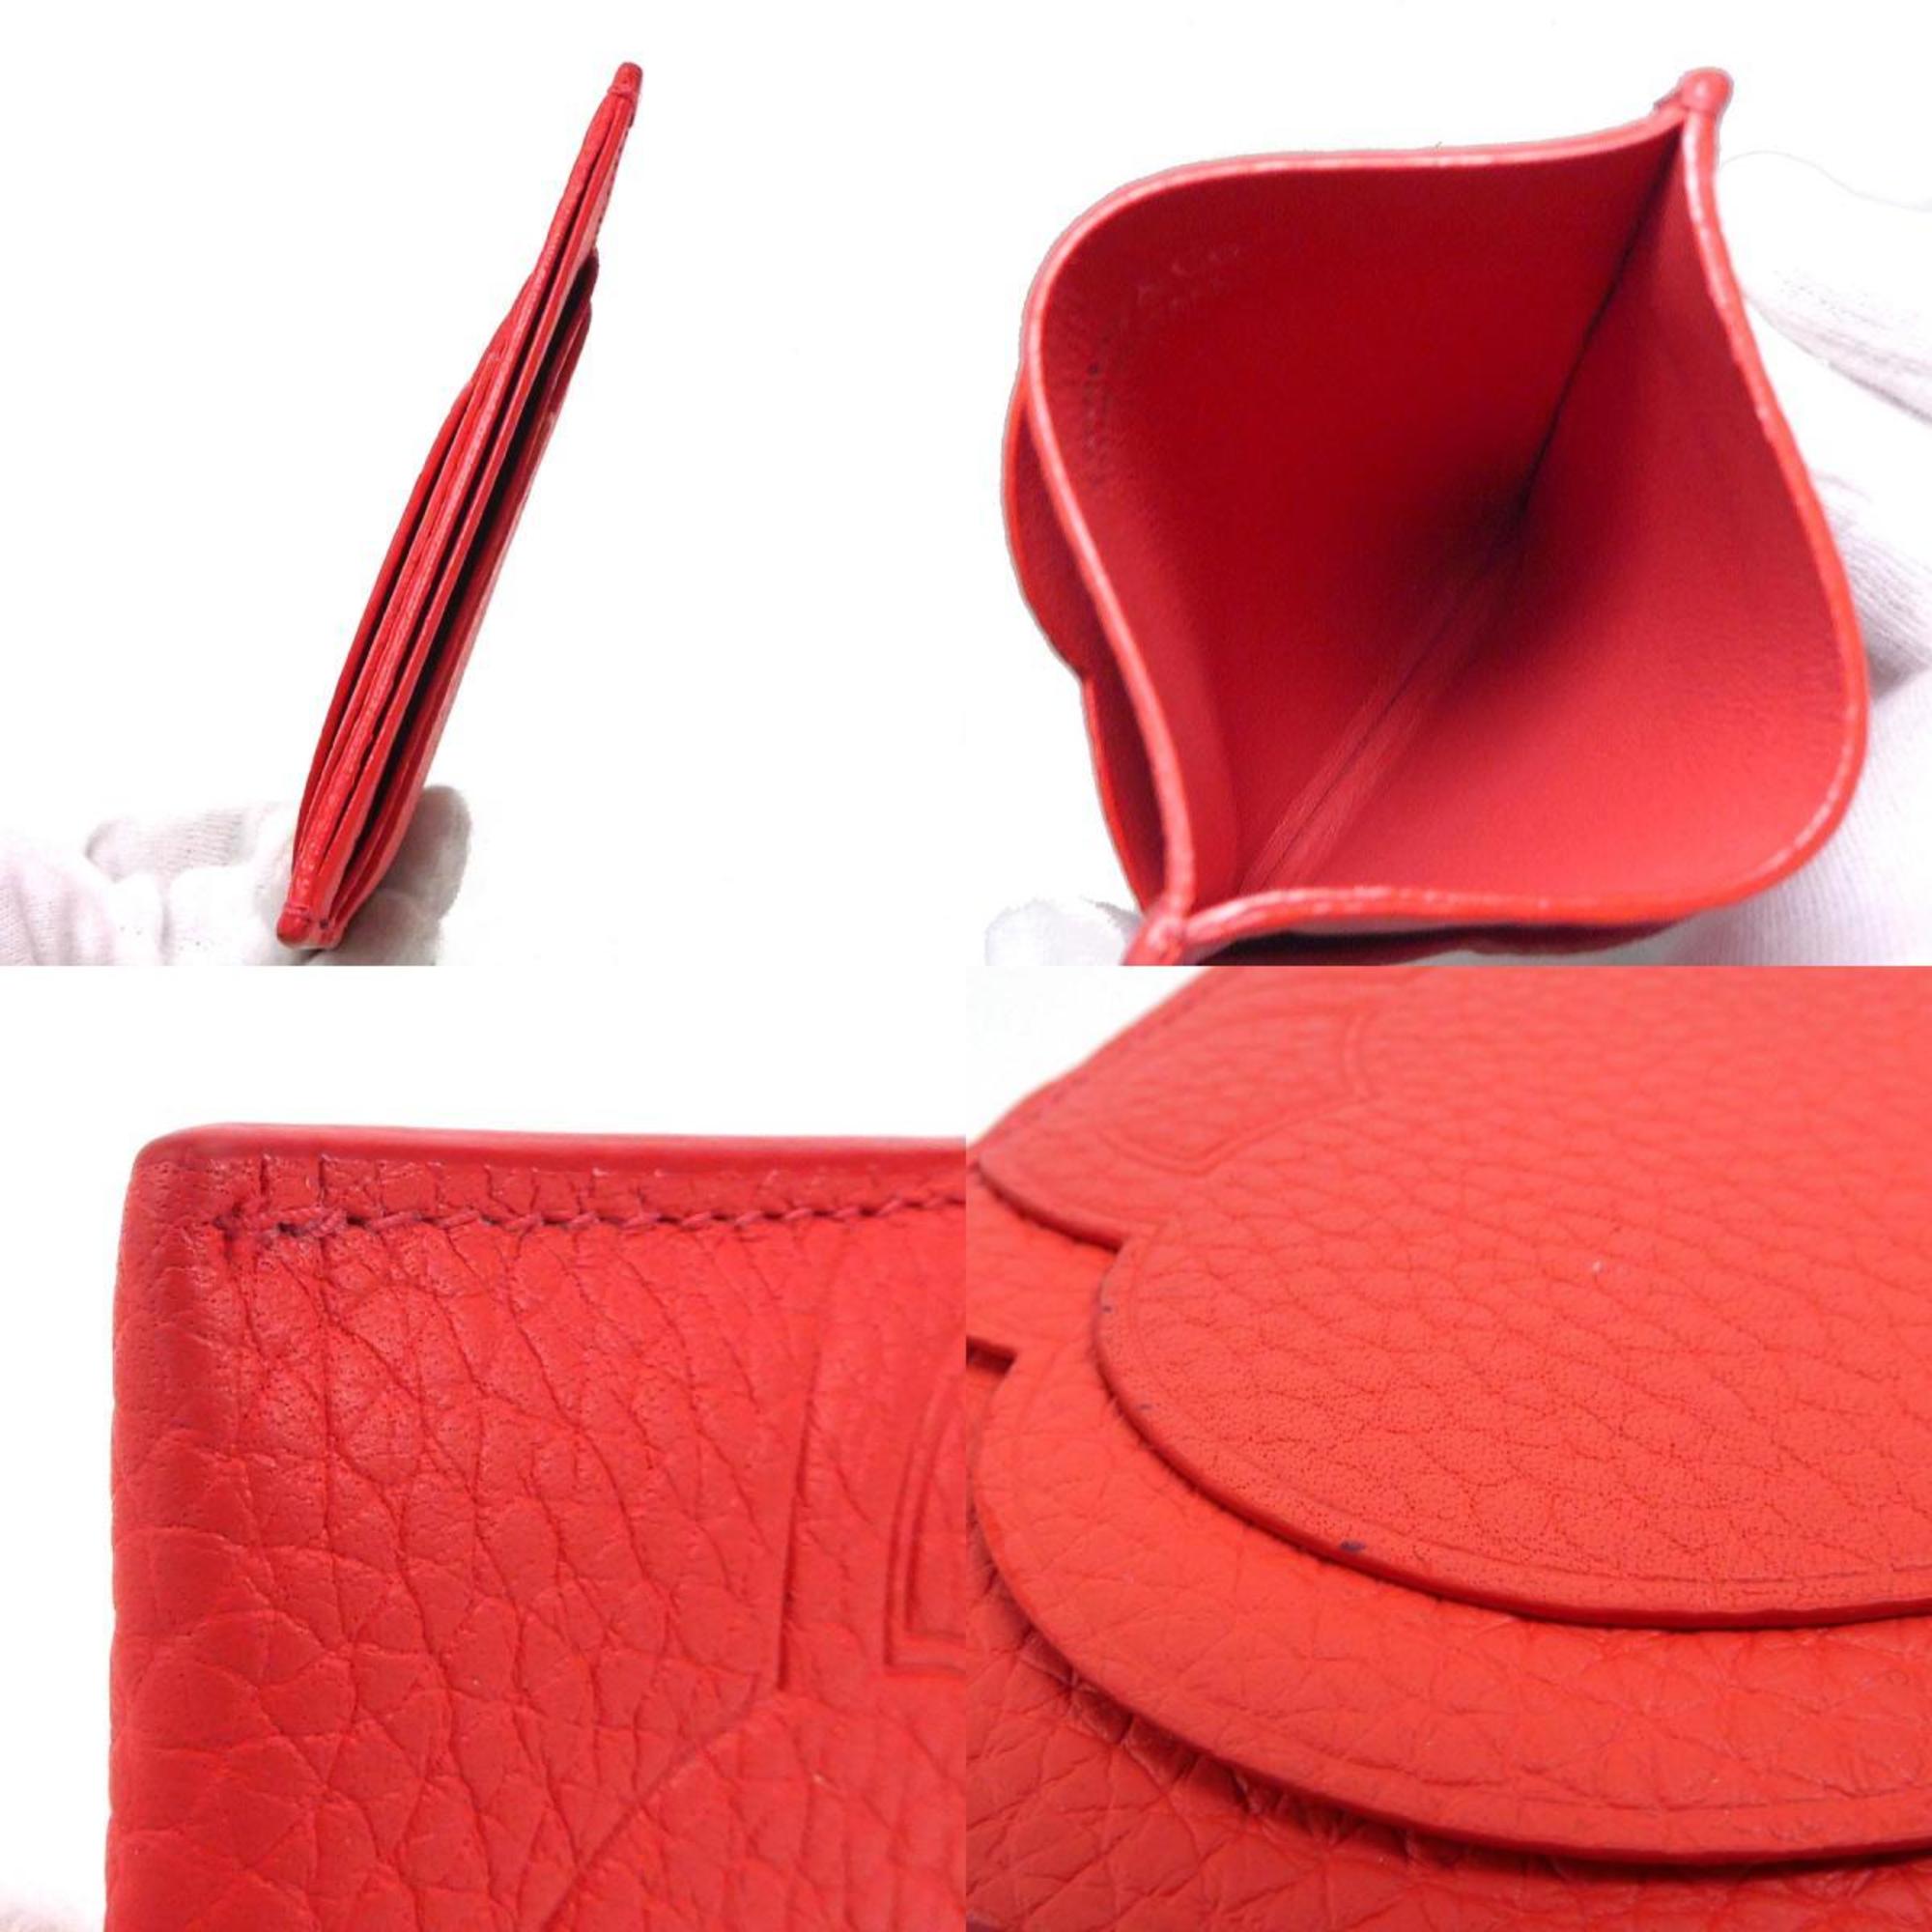 Tiffany TIFFANY&Co. Card Case Business Holder Pass Return to Leather Red Ladies